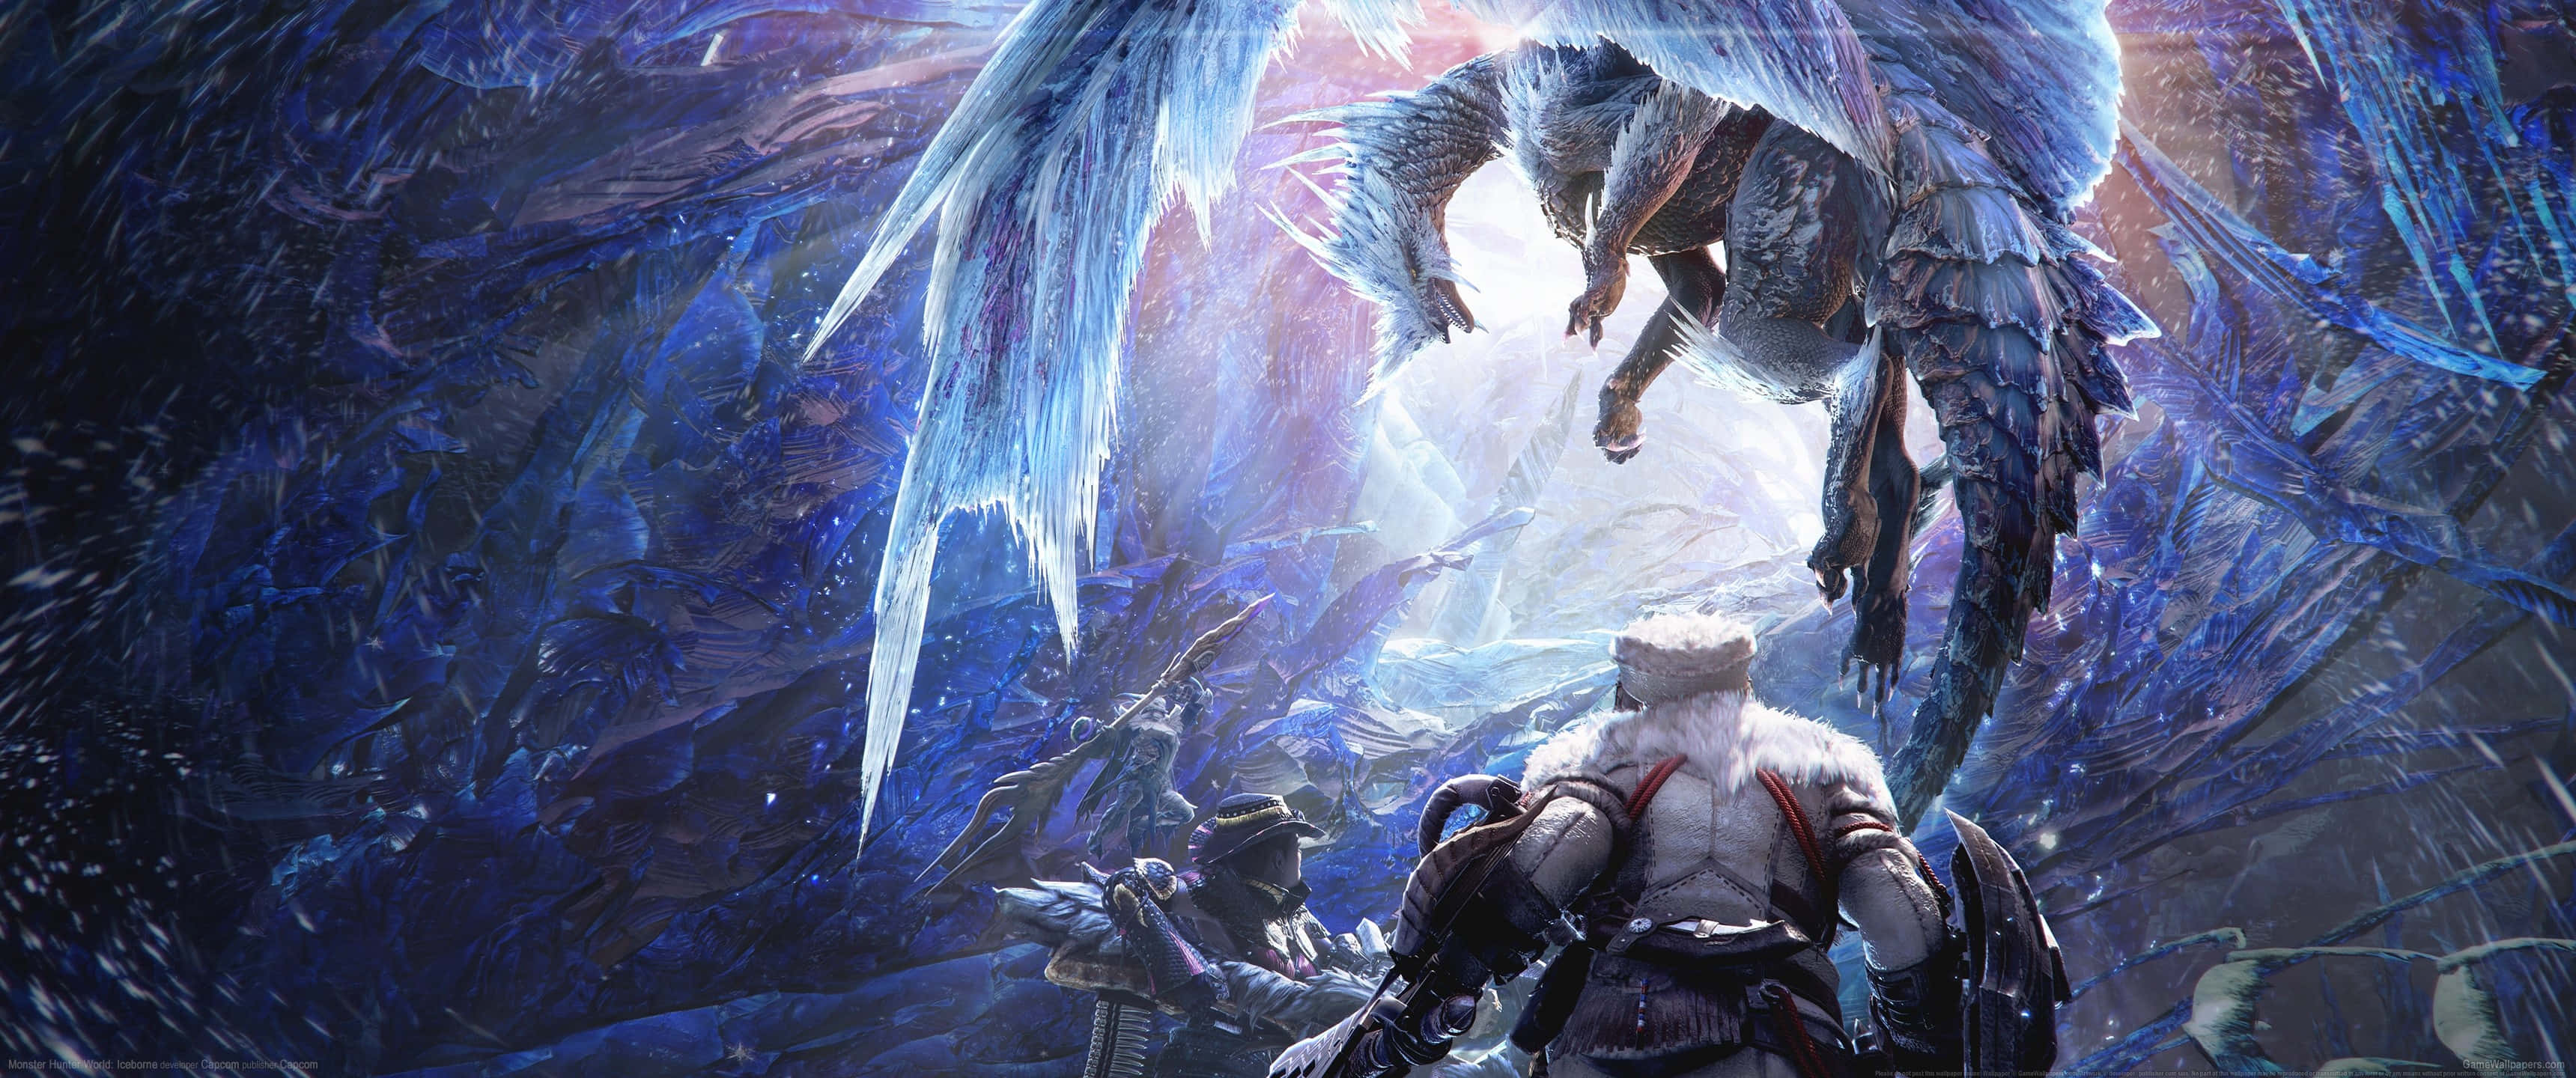 3440x1440p Assassin's Creed Odyssey Background Icy Dragon Facing Two Hunters Background